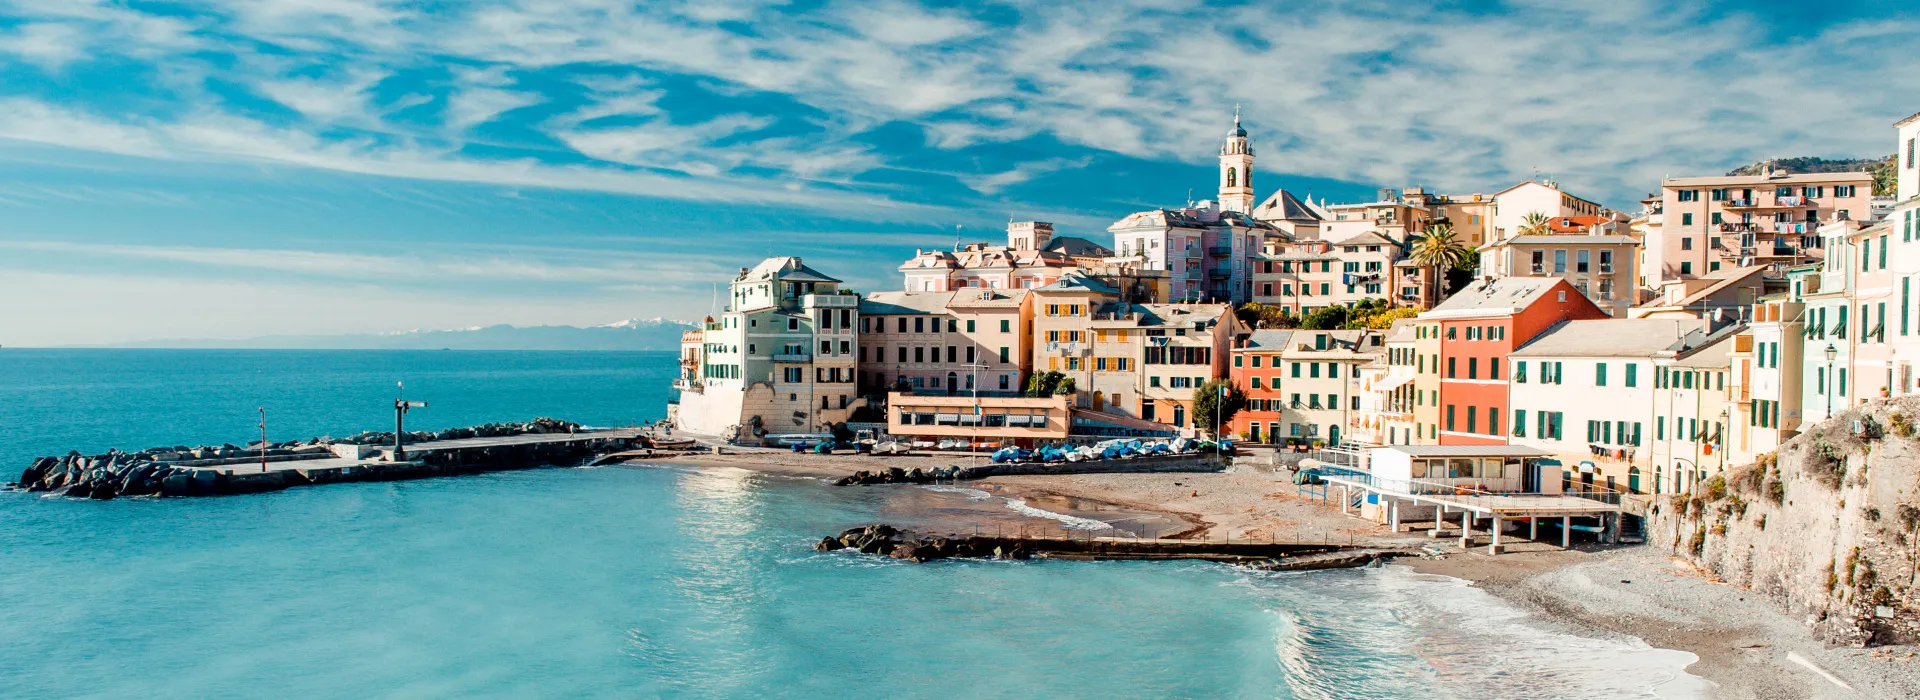 Hotels in Italien background image